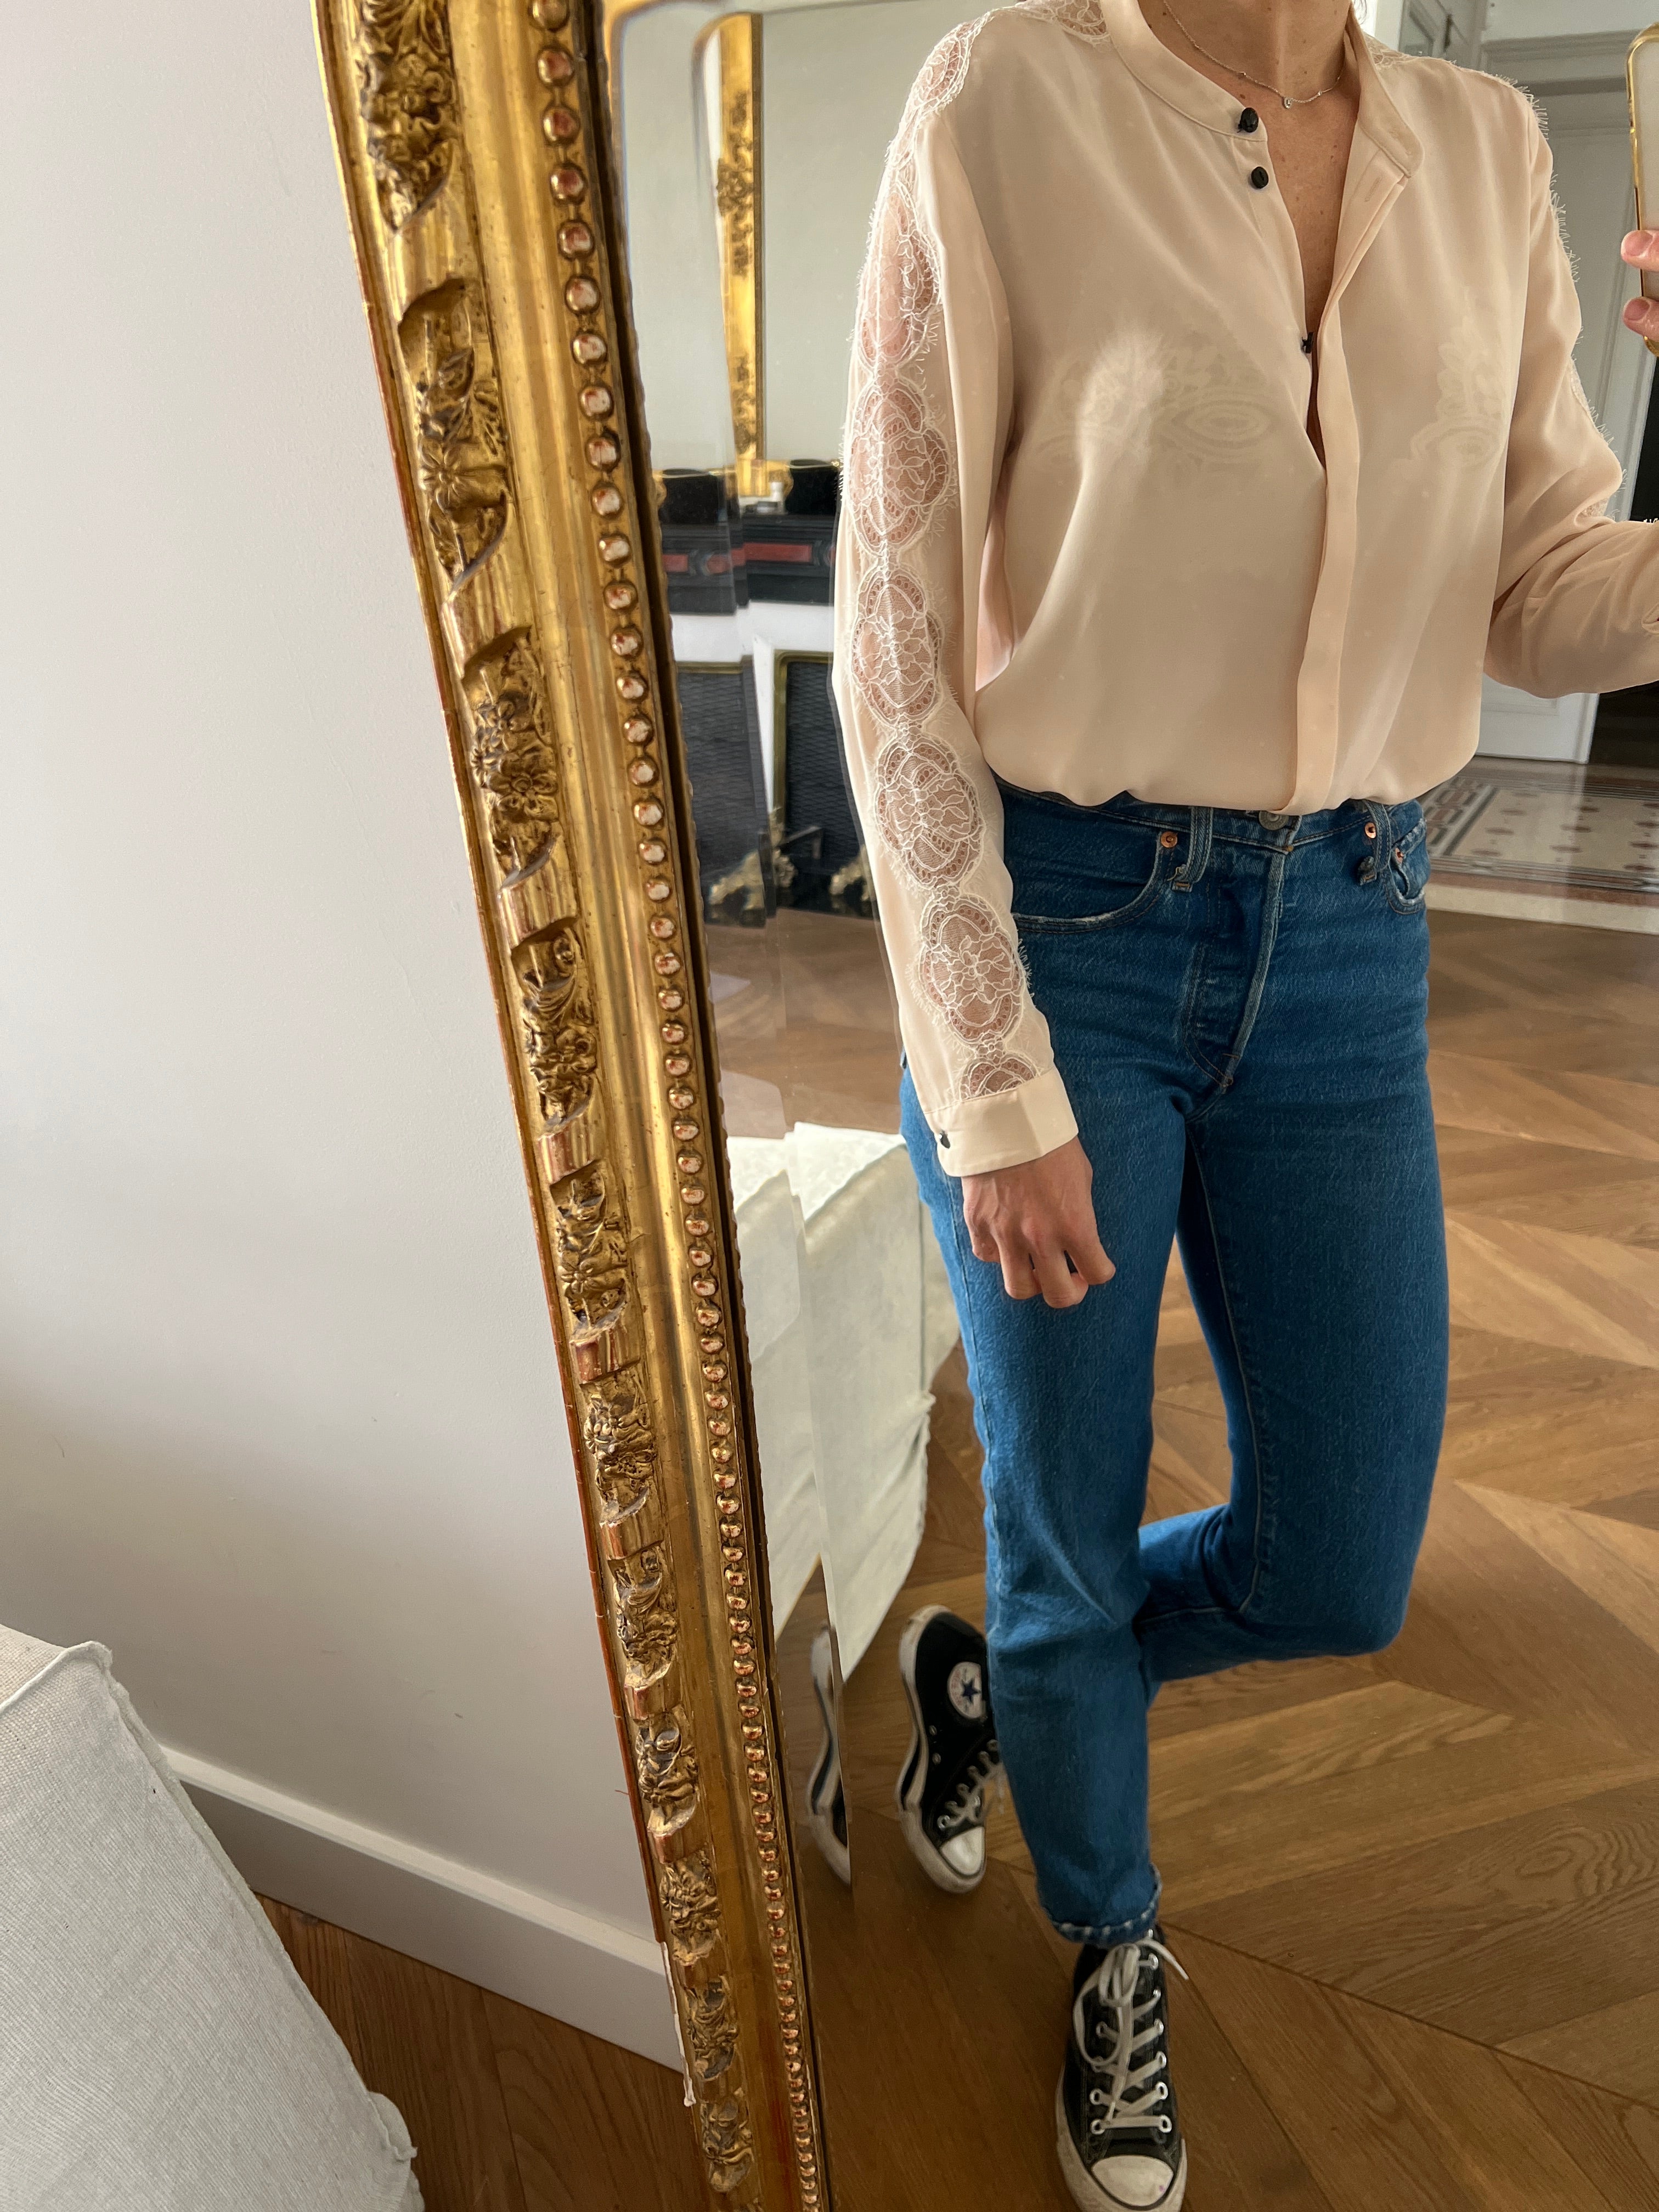 Chemise The Kooples fluide rose pale